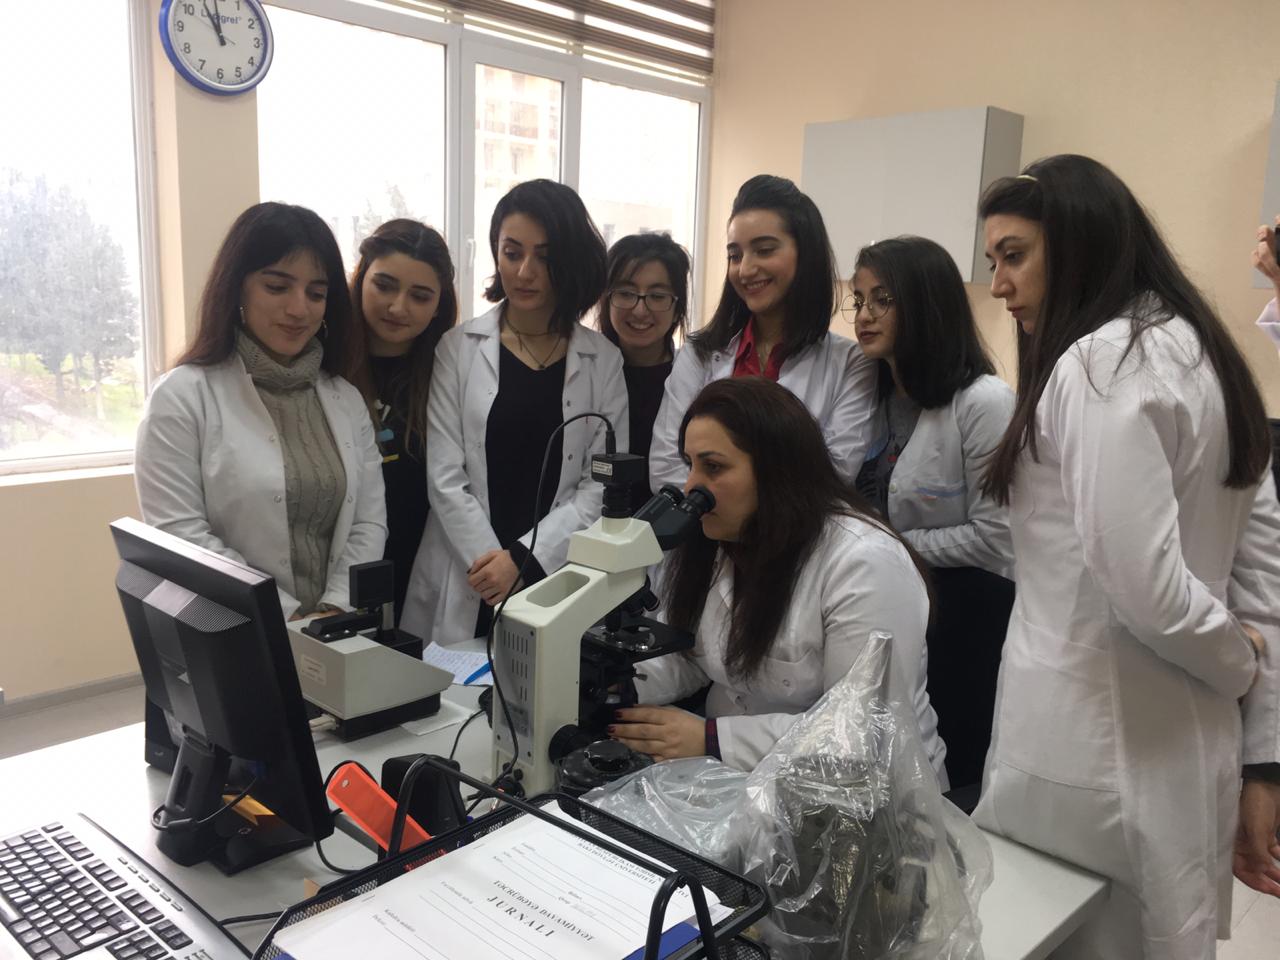 Students of “SABAH” group of Baku State University practice at the Institute of Biophysics of ANAS